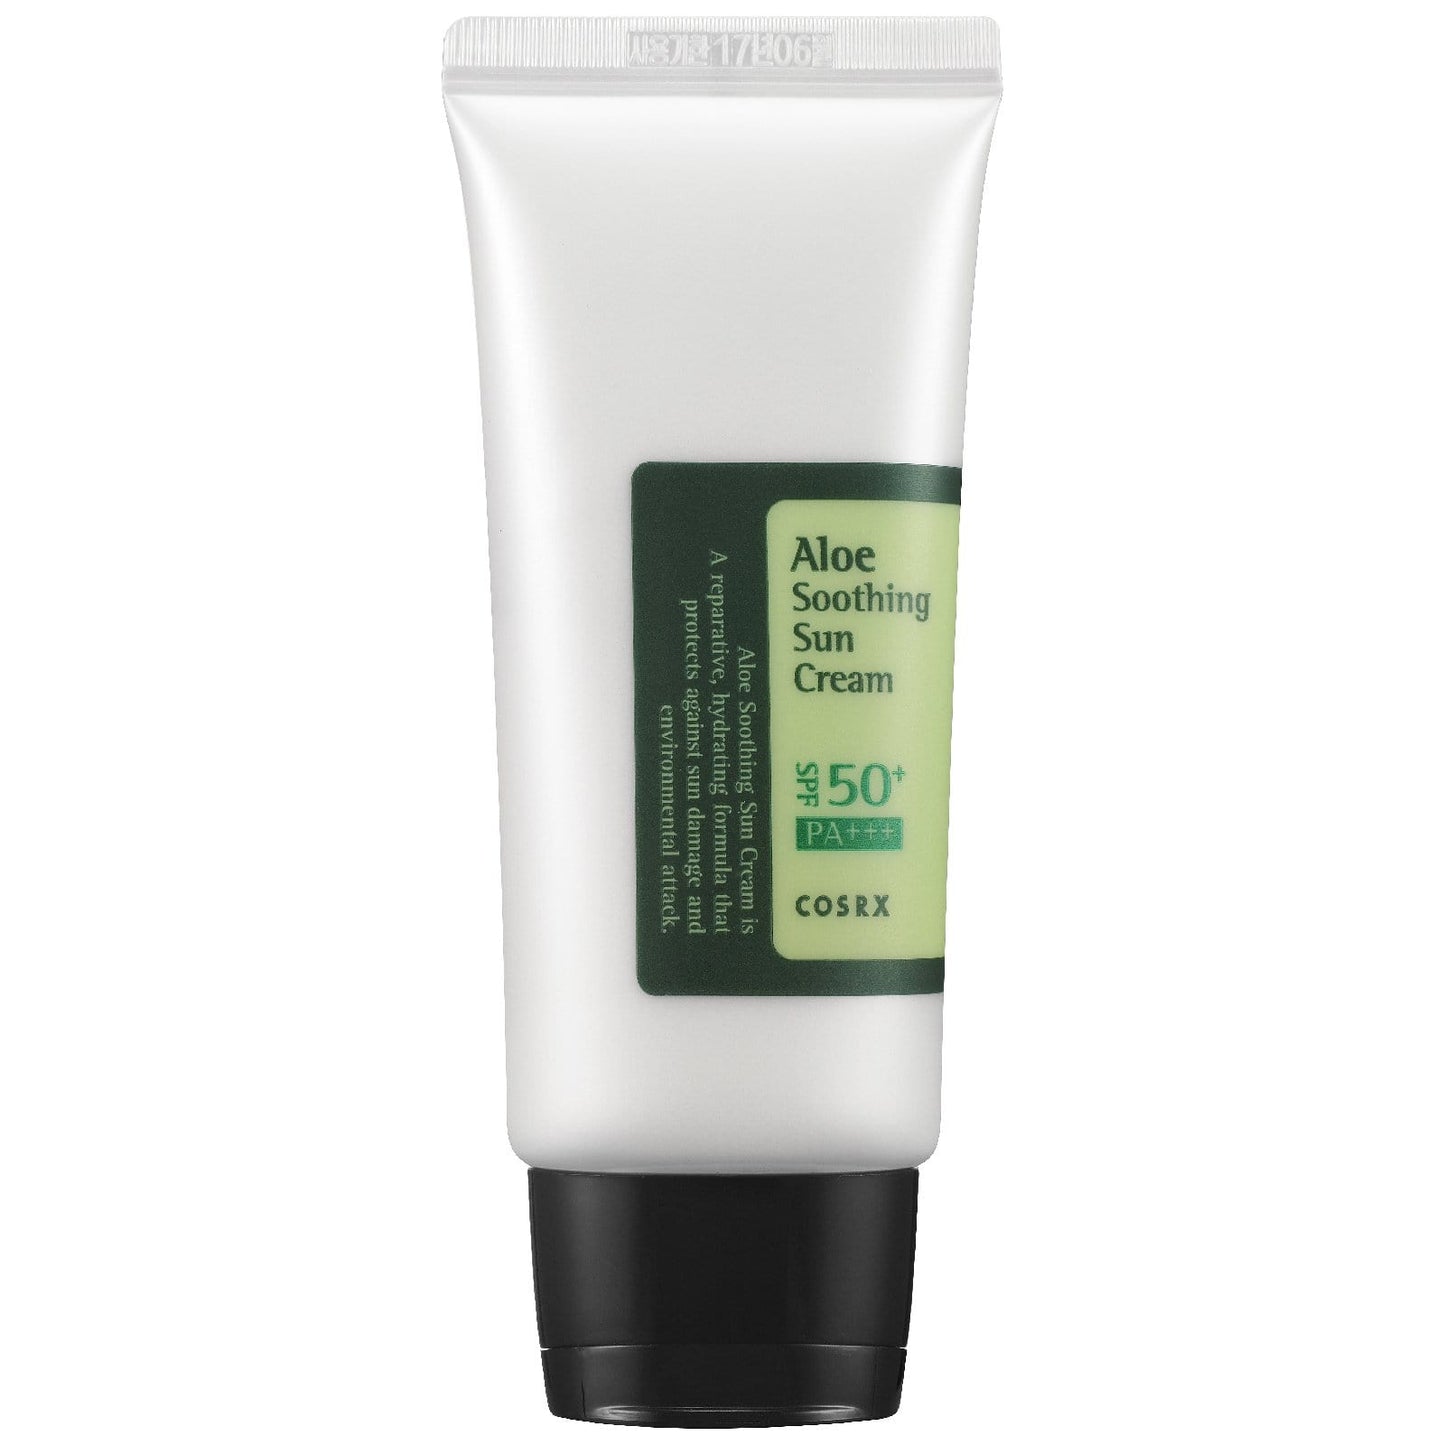 COSRX - Soothing sunscreen with aloe SPF 50 PA+++ 50 ml - Cosrx - Ethni Beauty Market